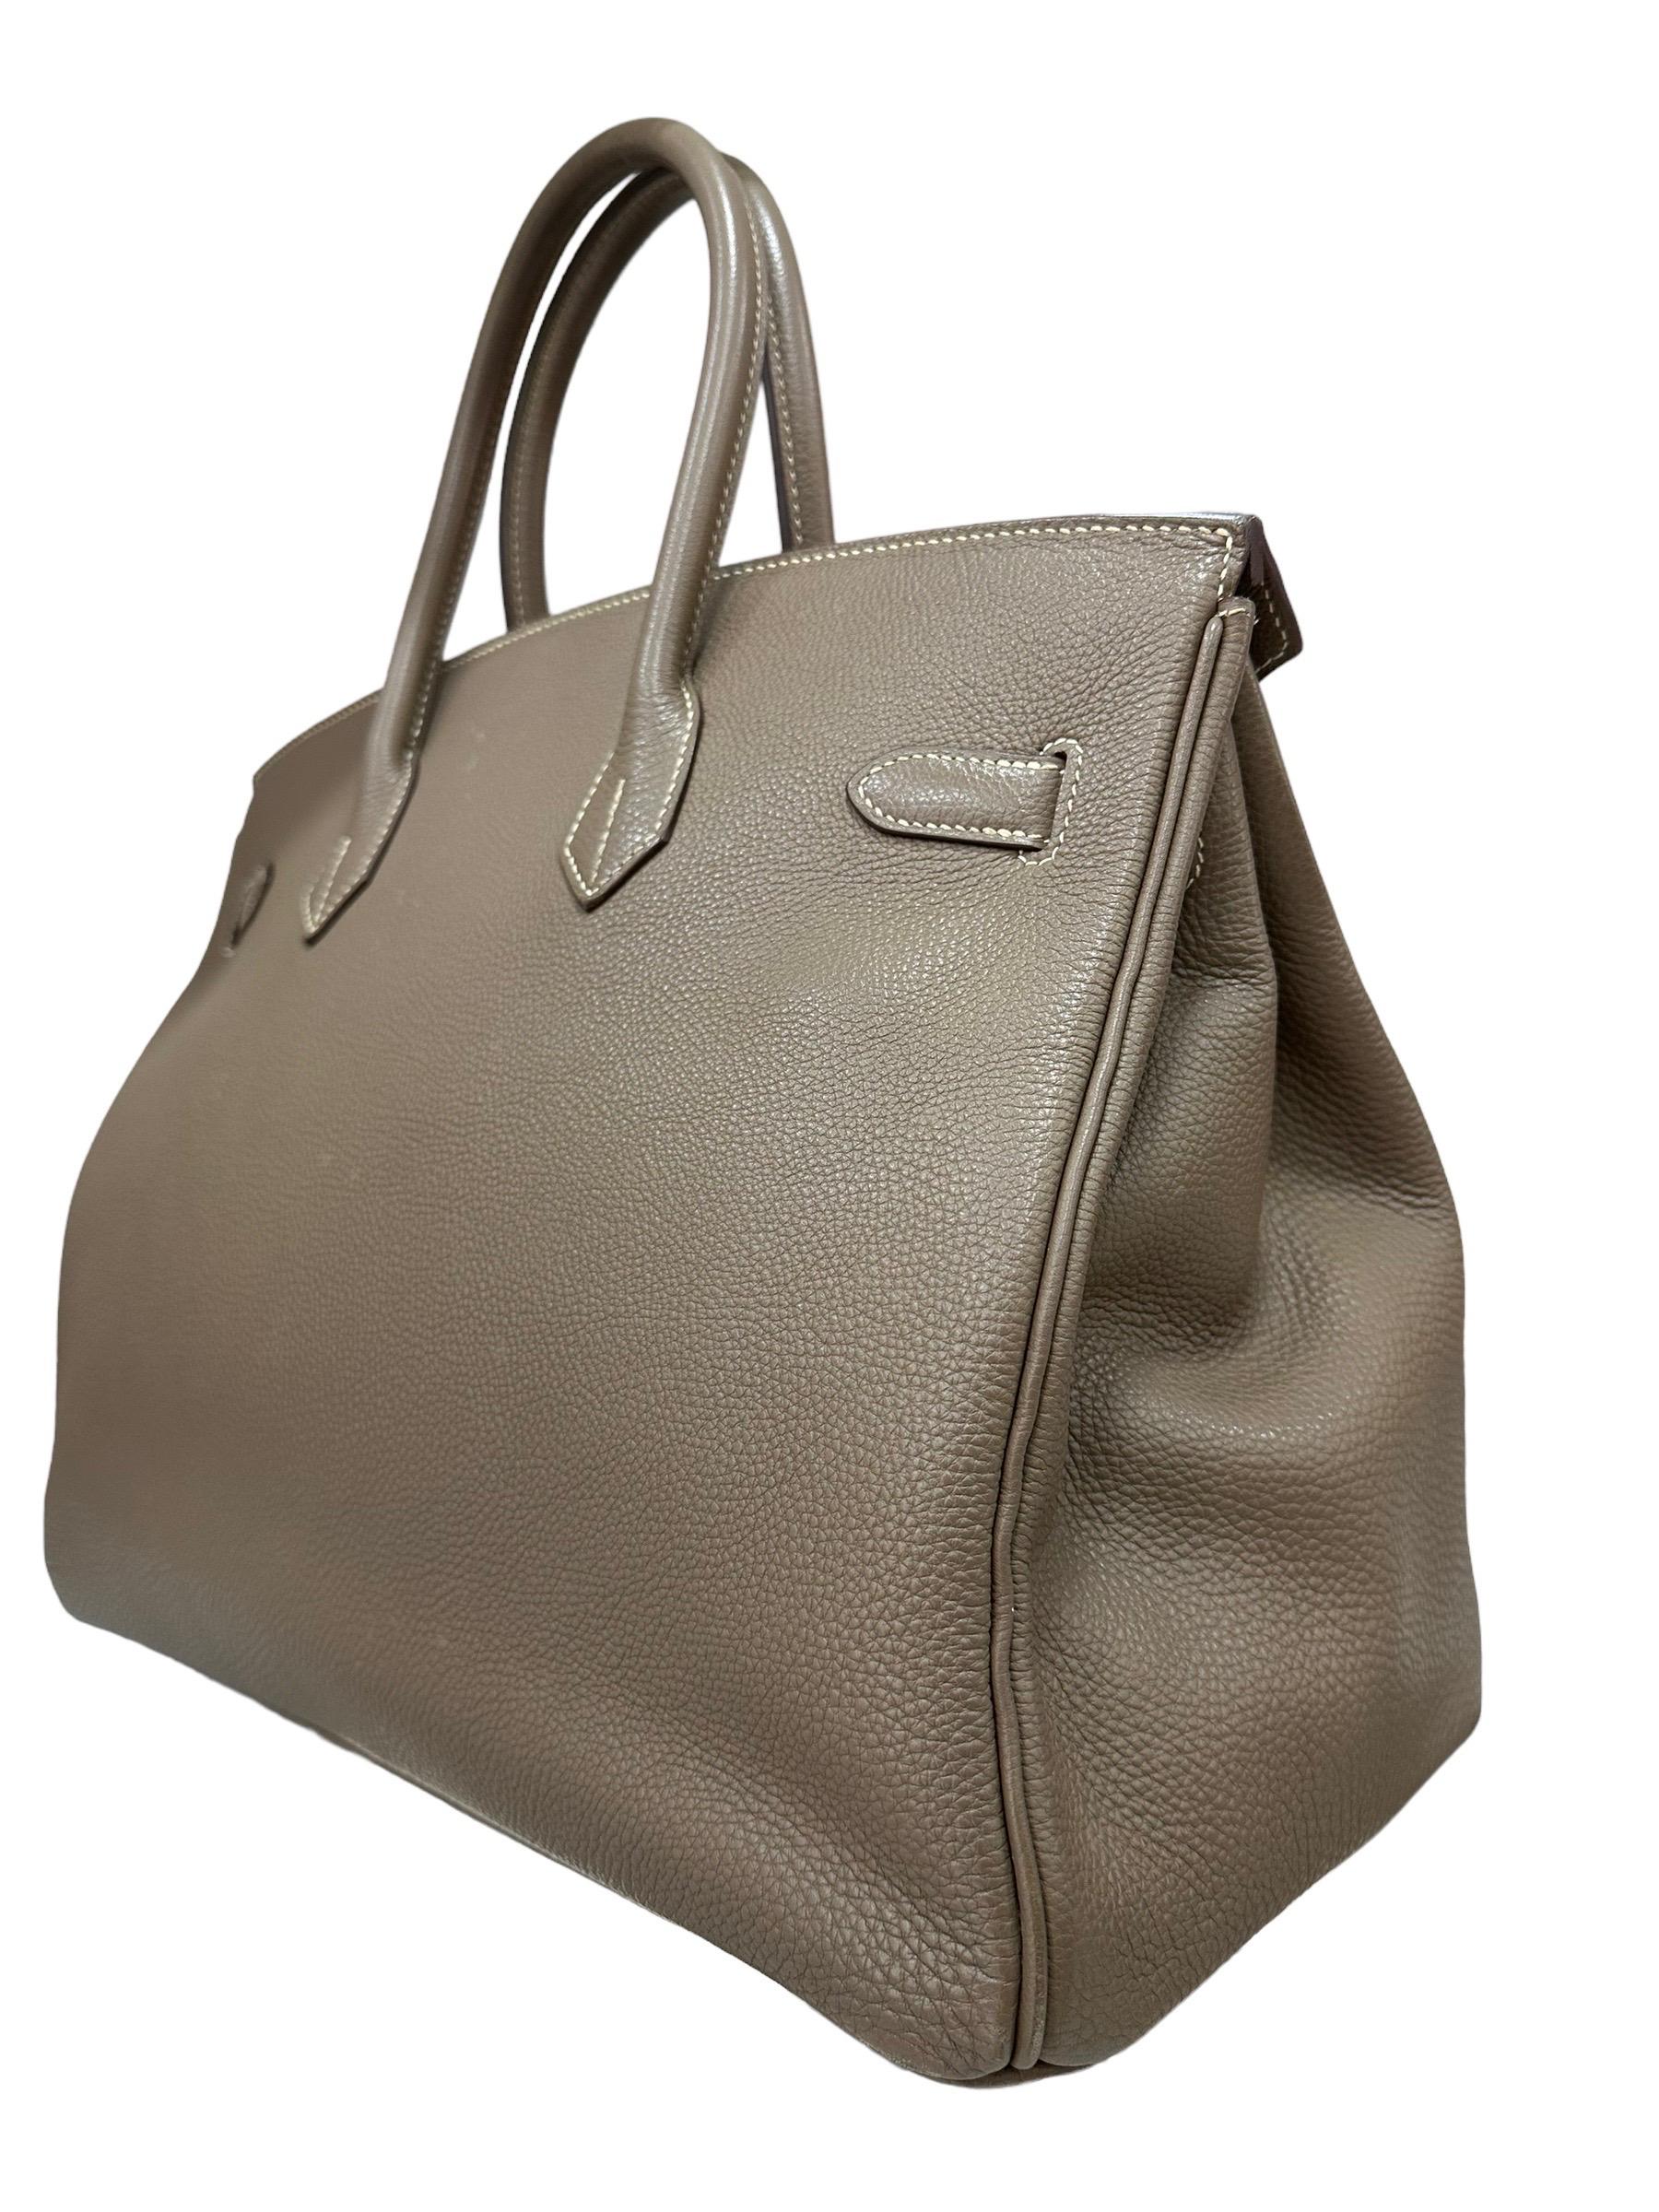 2008 Hermès Birkin 35 Togo Leather Toundra Top Handle Bag In Good Condition For Sale In Torre Del Greco, IT